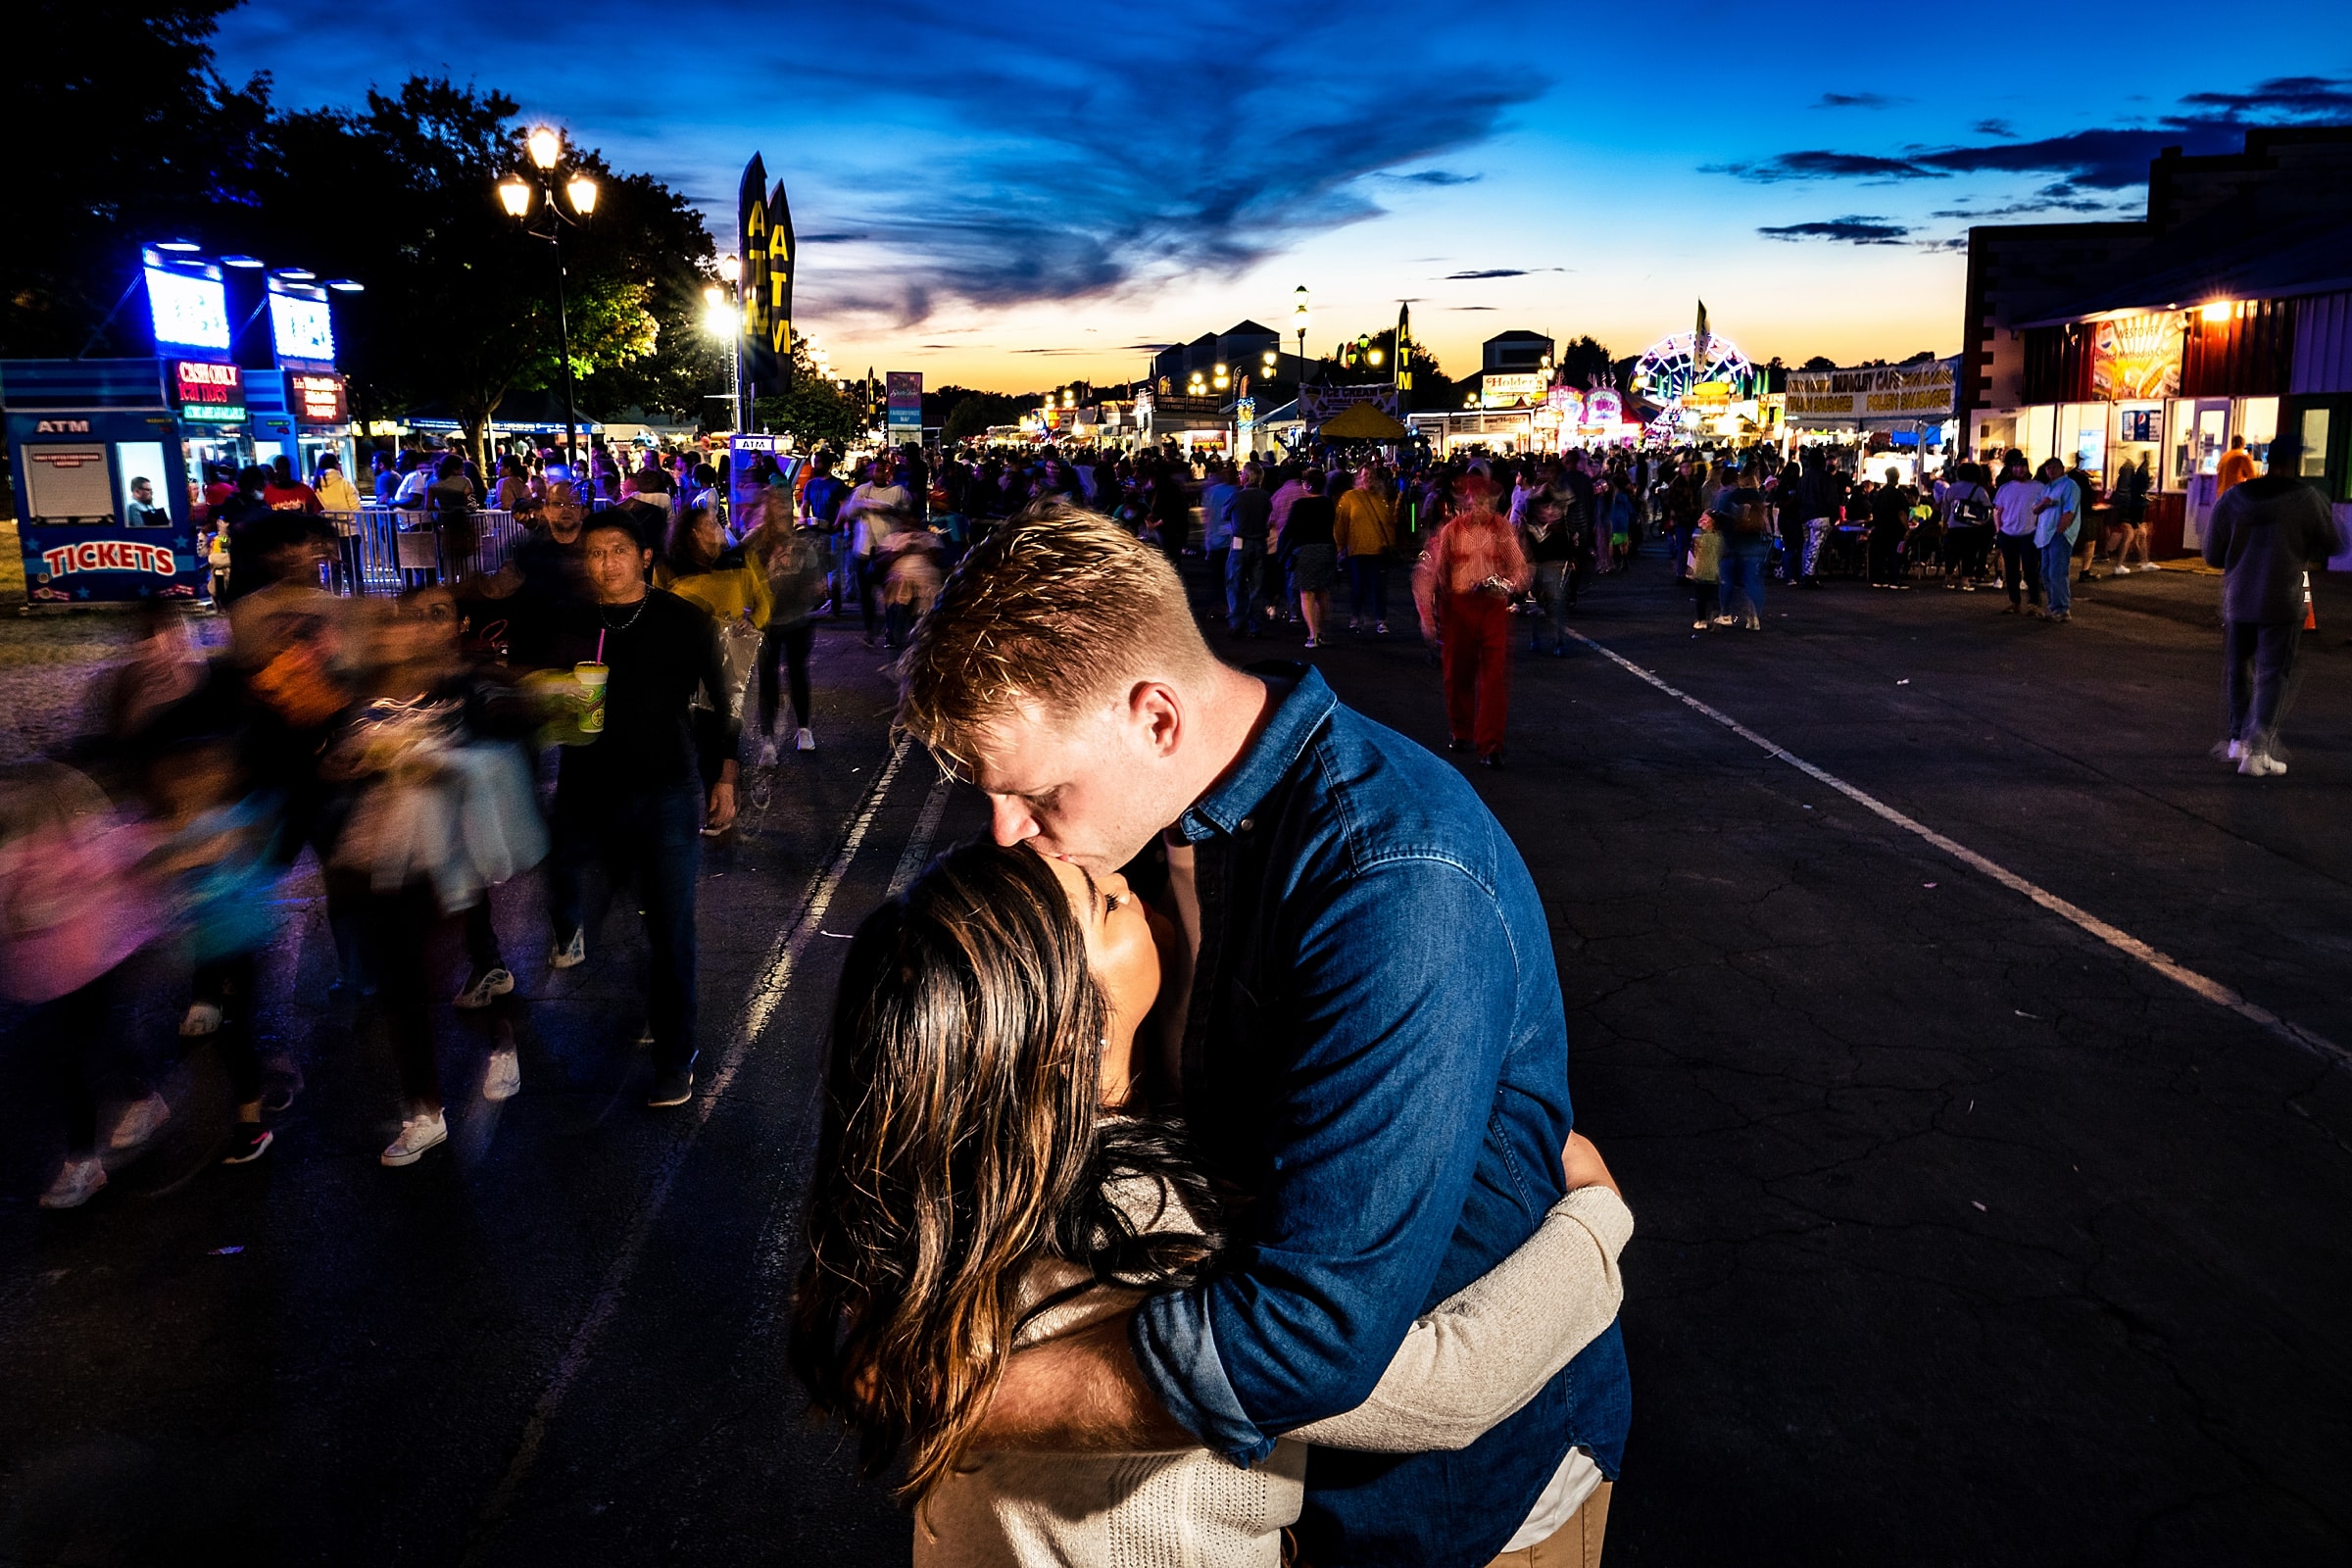 NC State Fair Engagement photos are some of the most fun